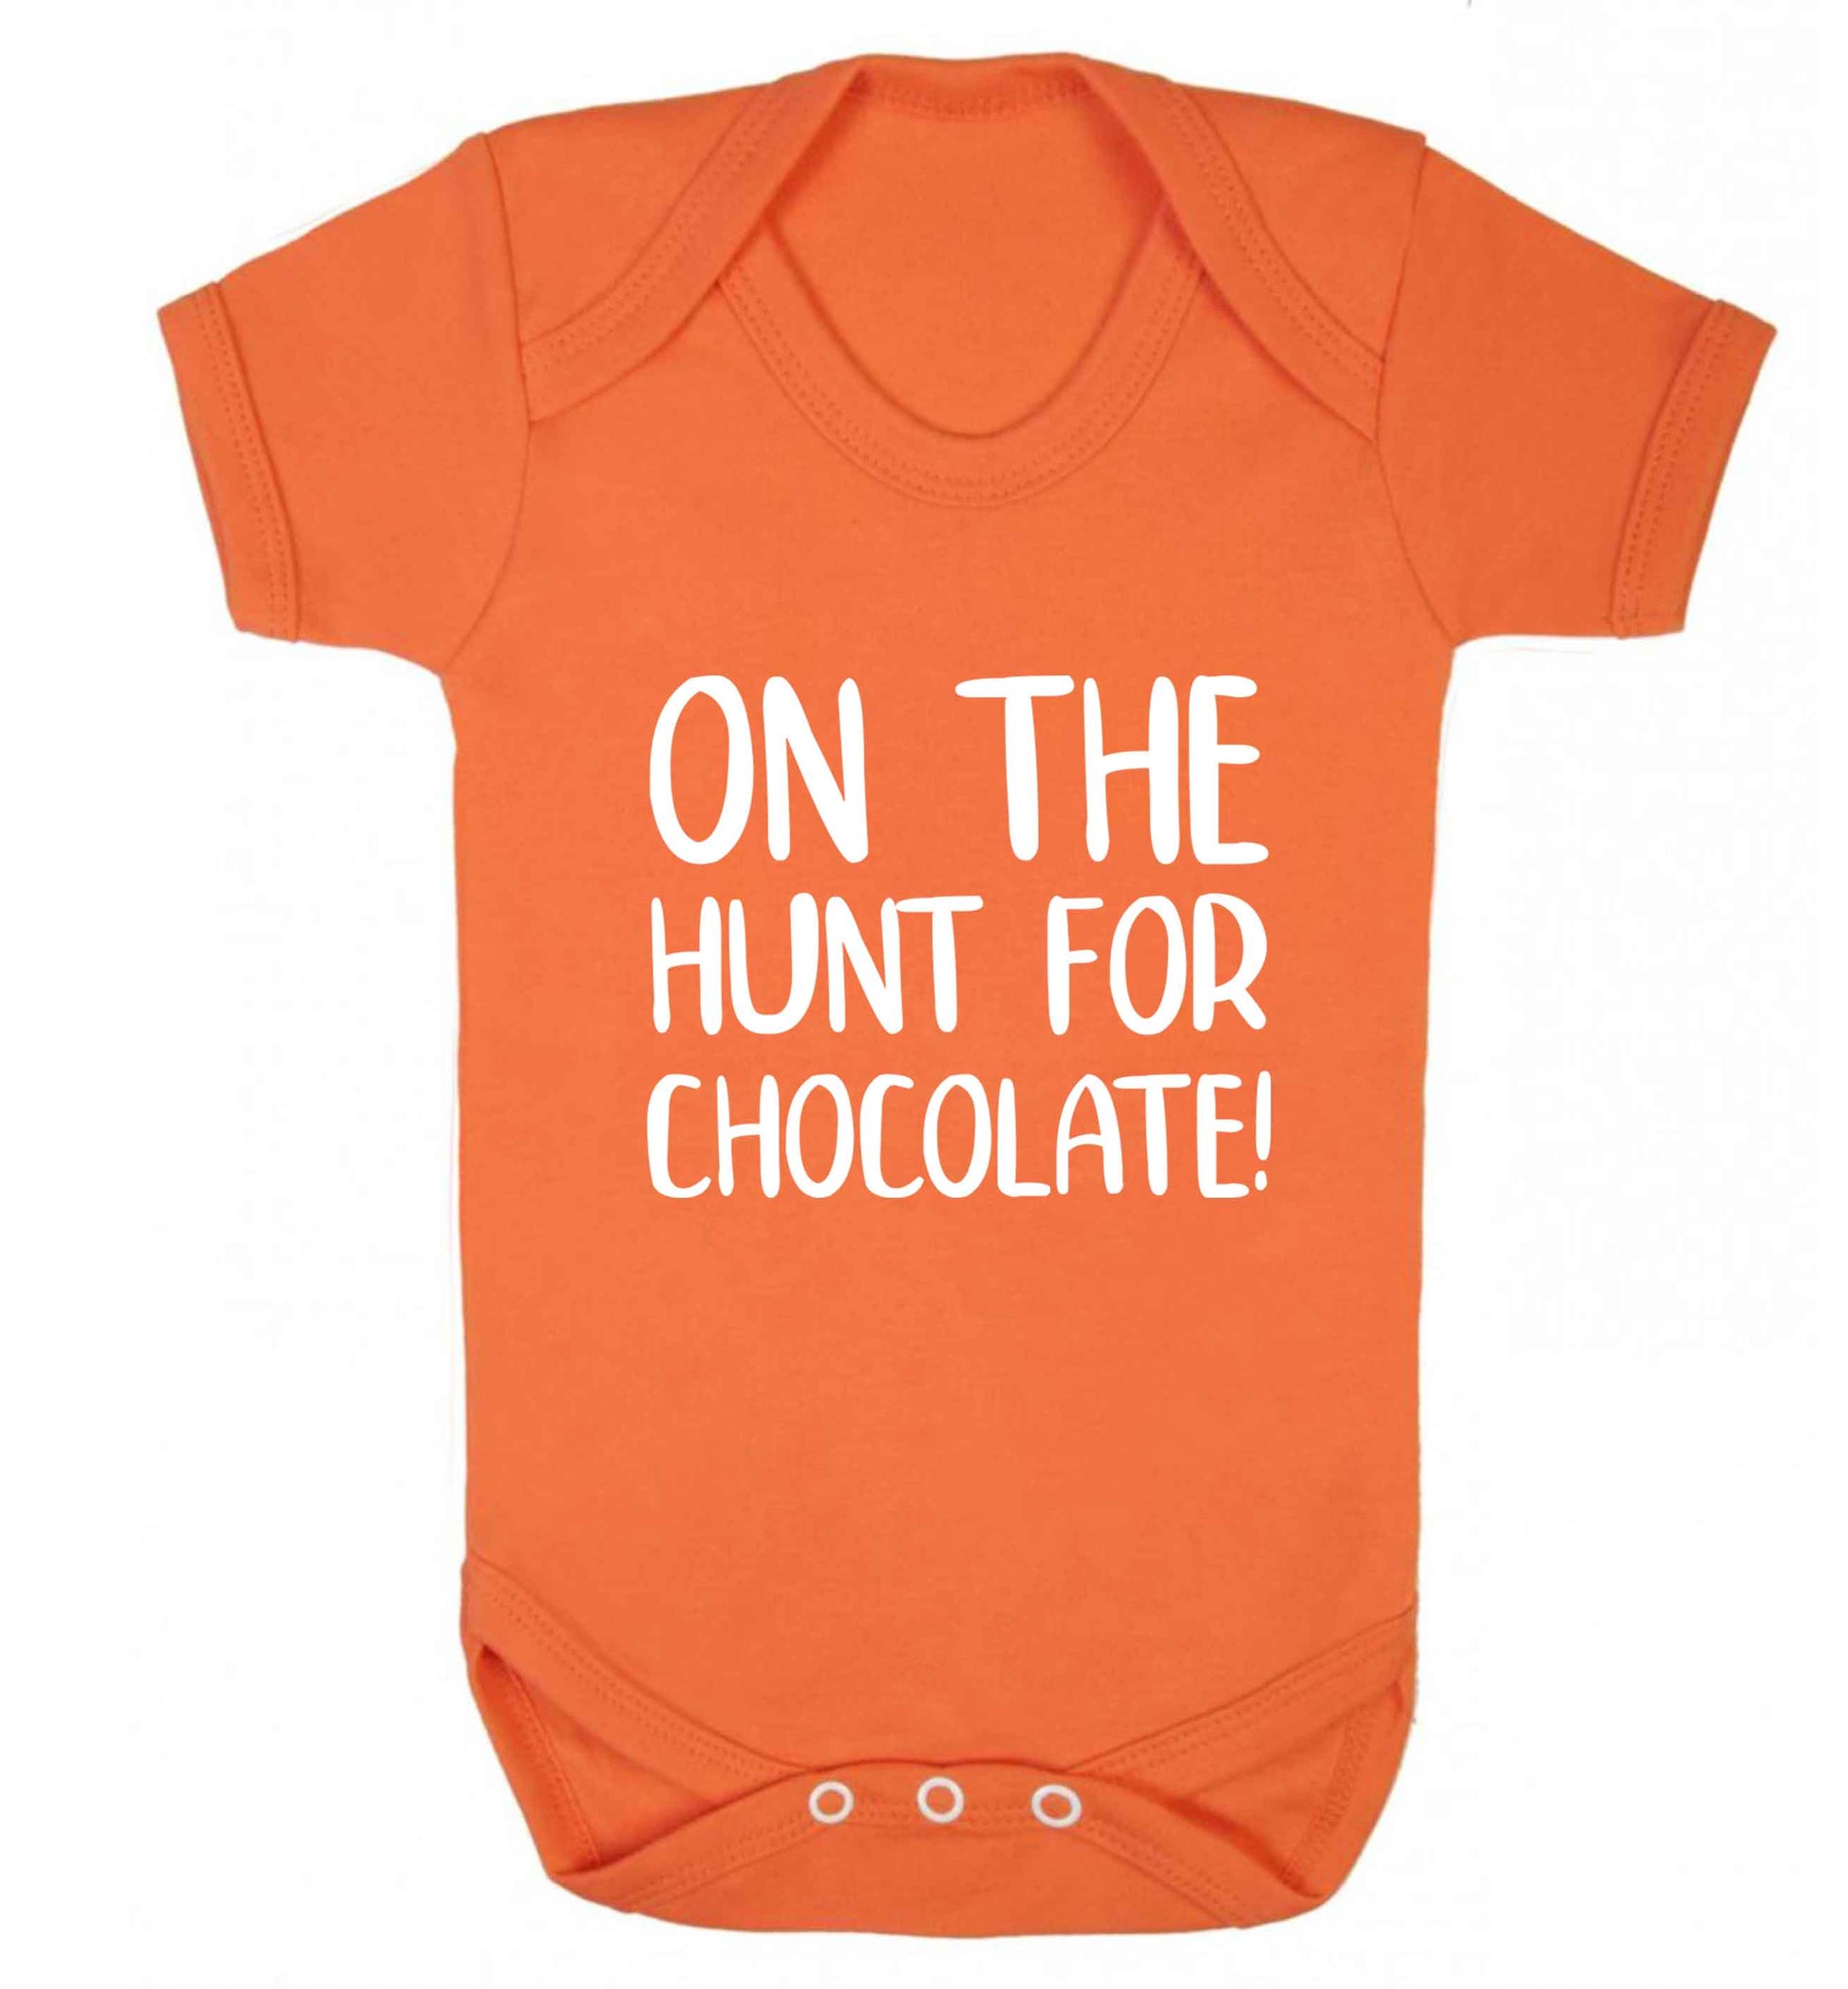 On the hunt for chocolate! baby vest orange 18-24 months